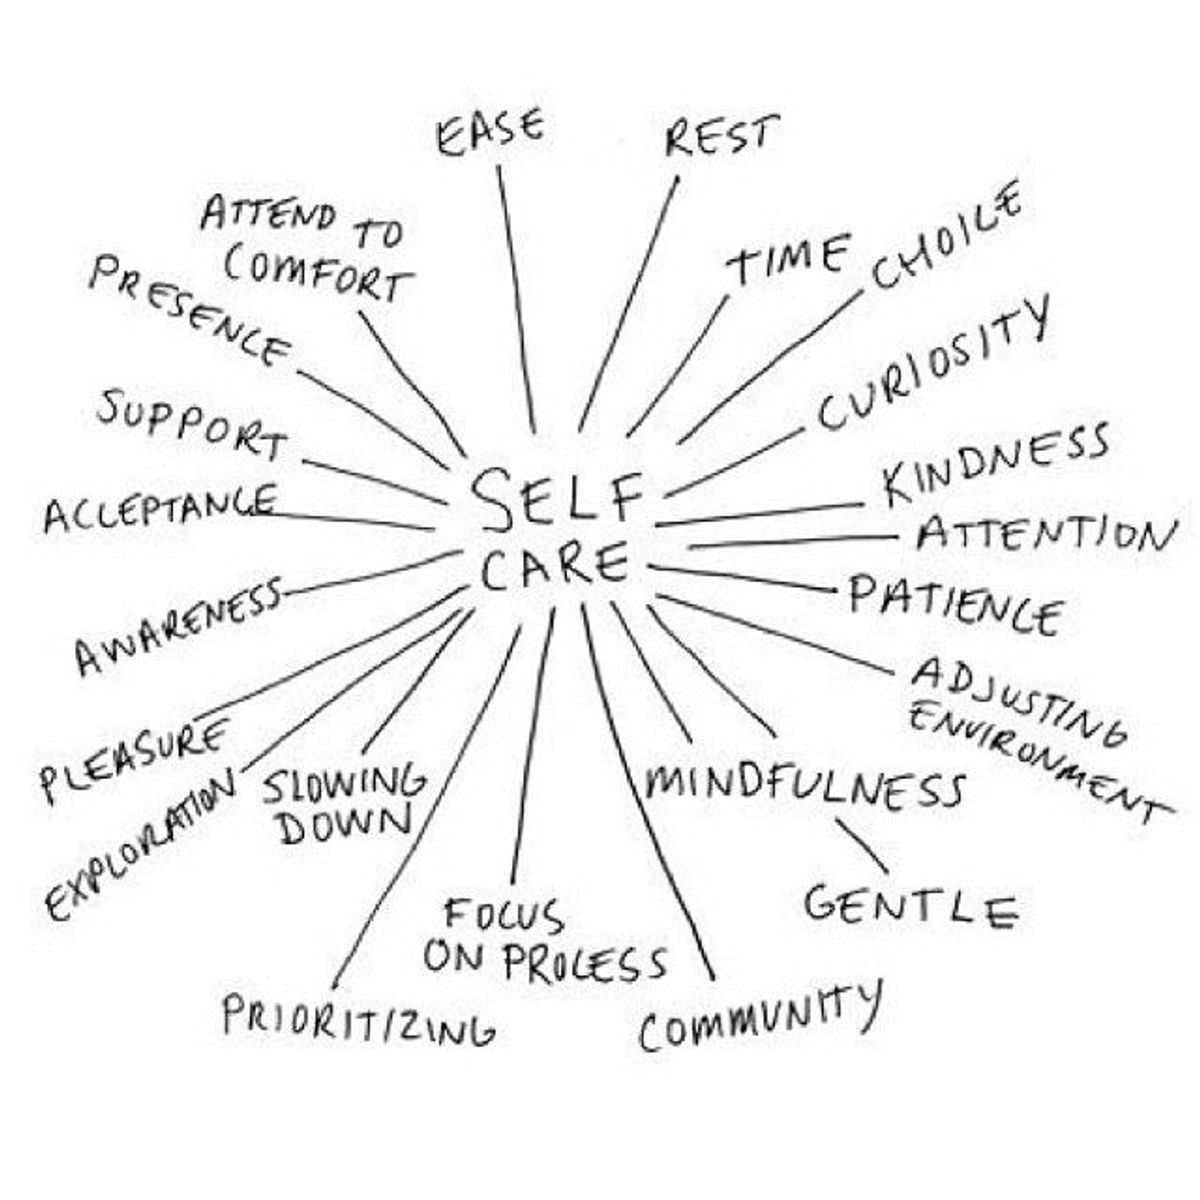 Why You Should Care About Self-Care